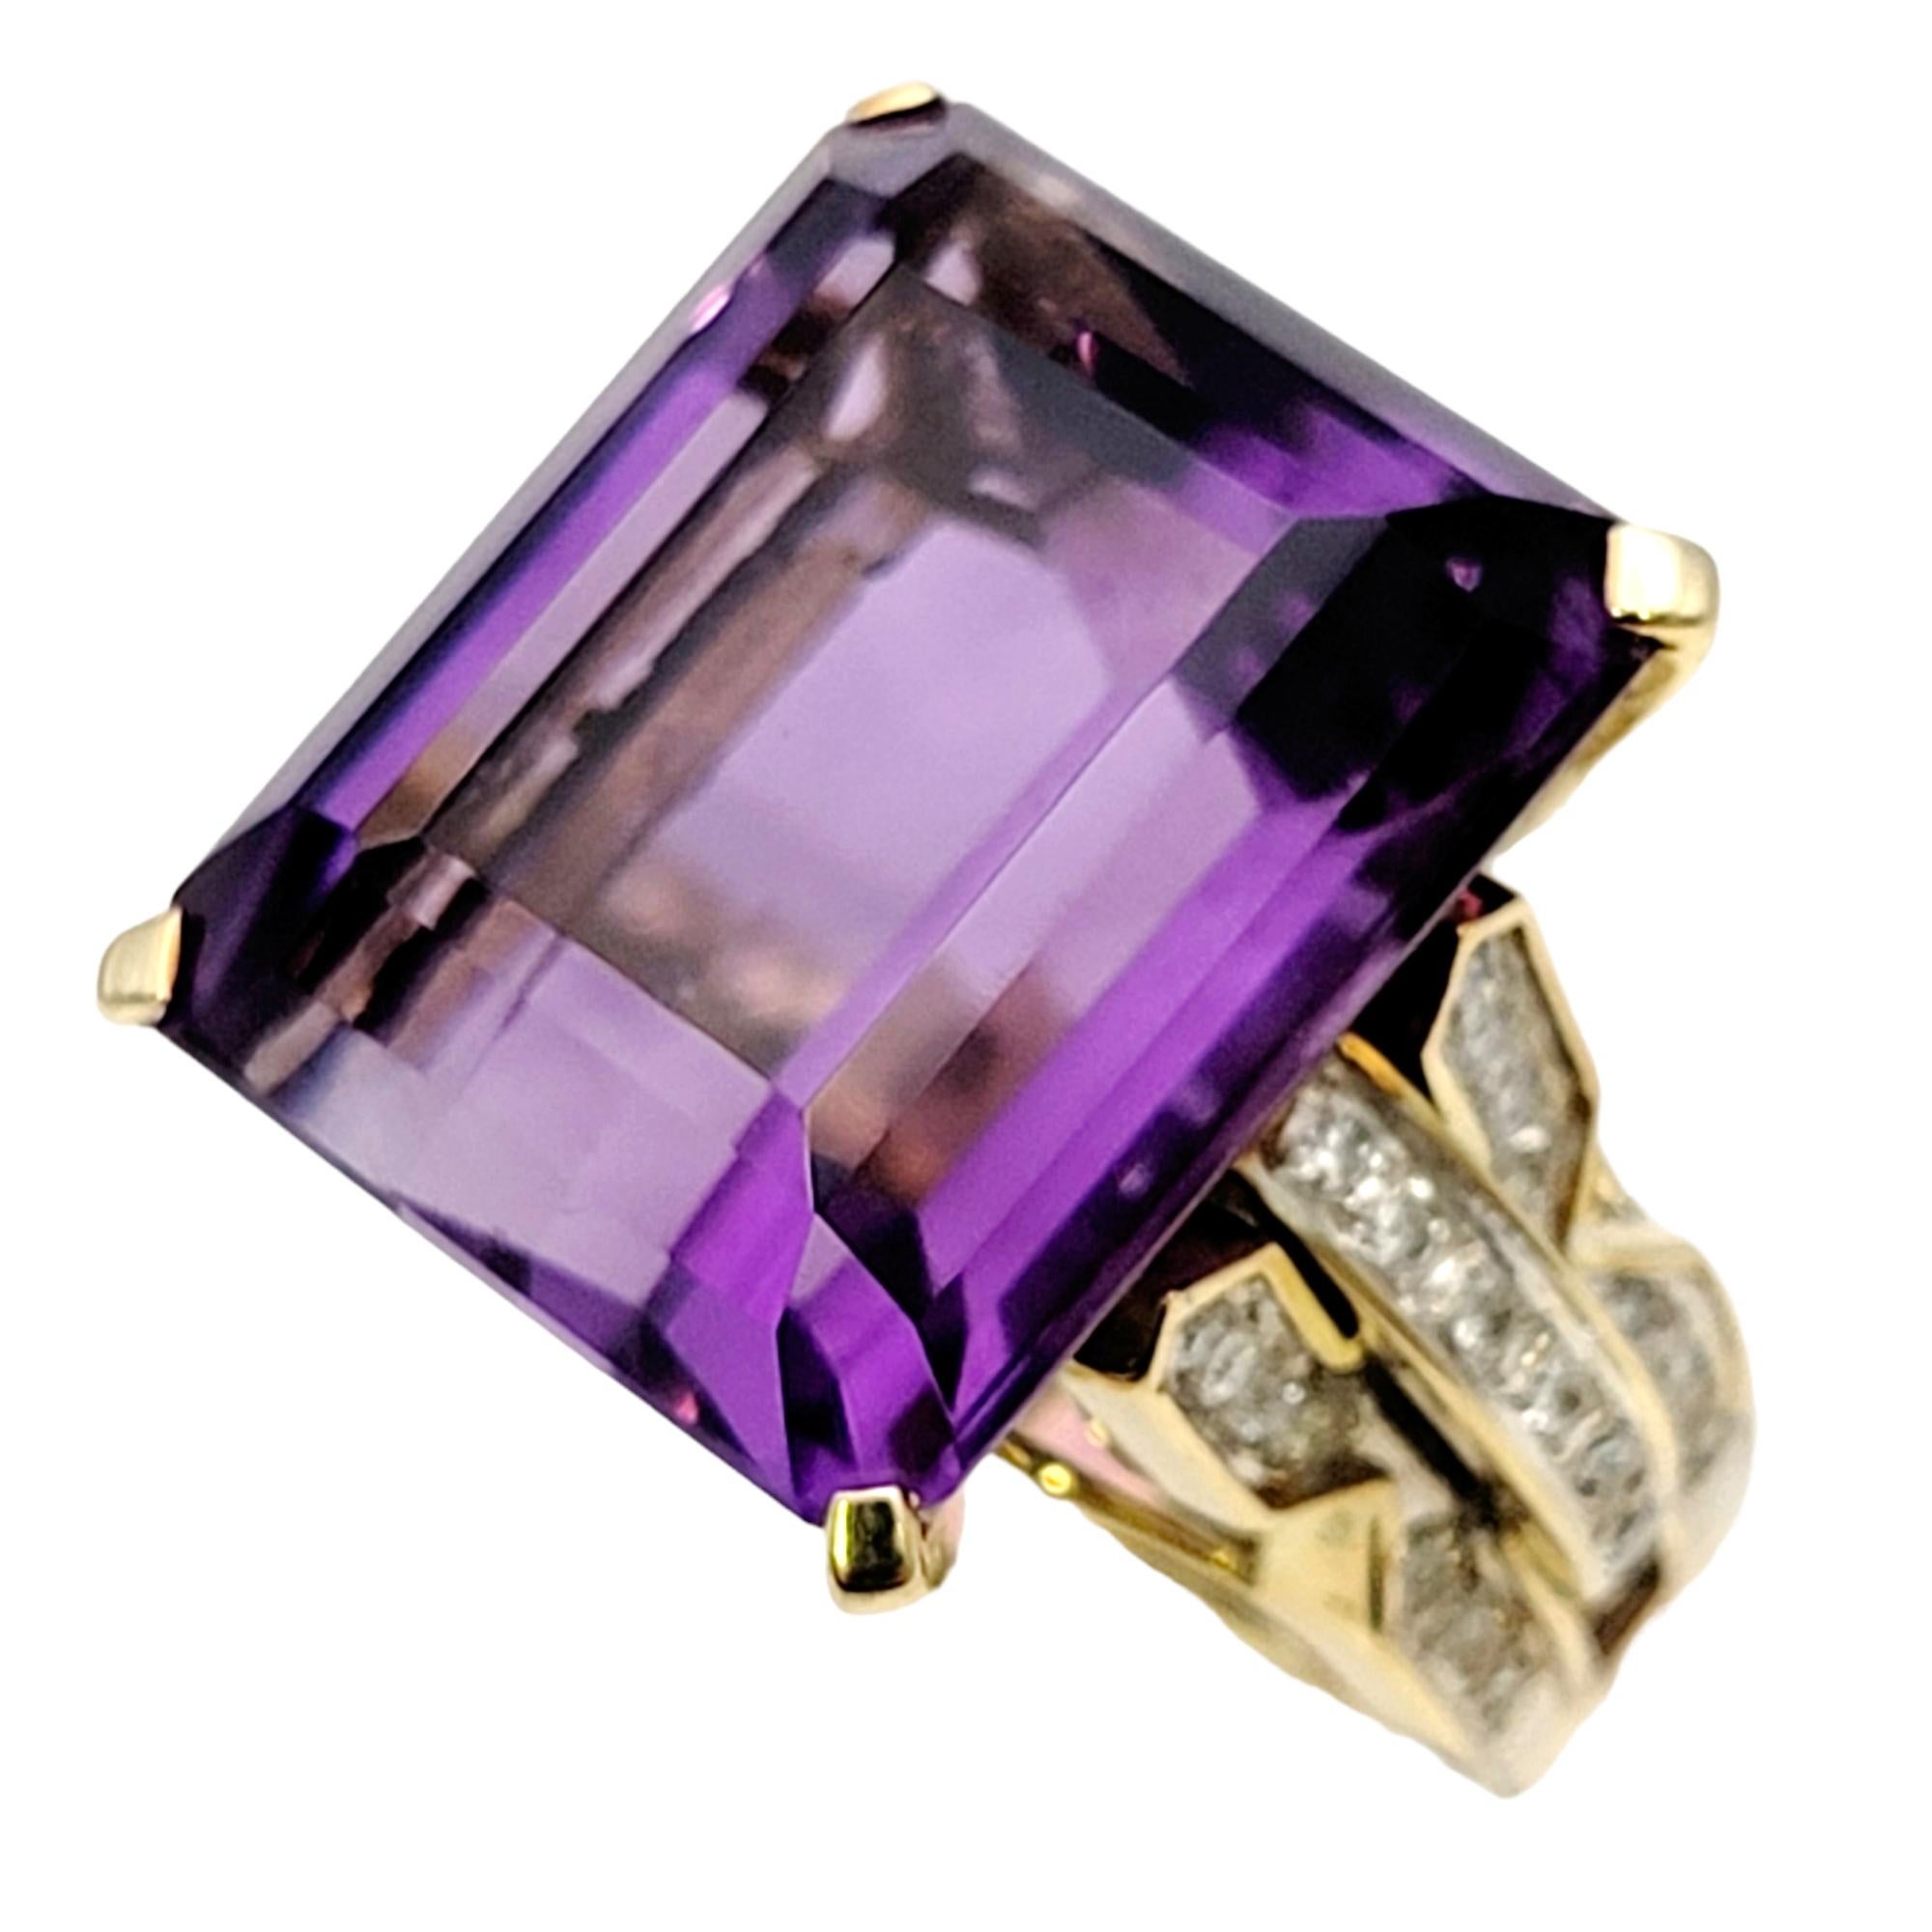 Contemporary Huge 34.85 Carat Emerald Cut Amethyst Cocktail Ring with Side Diamond Detailing For Sale